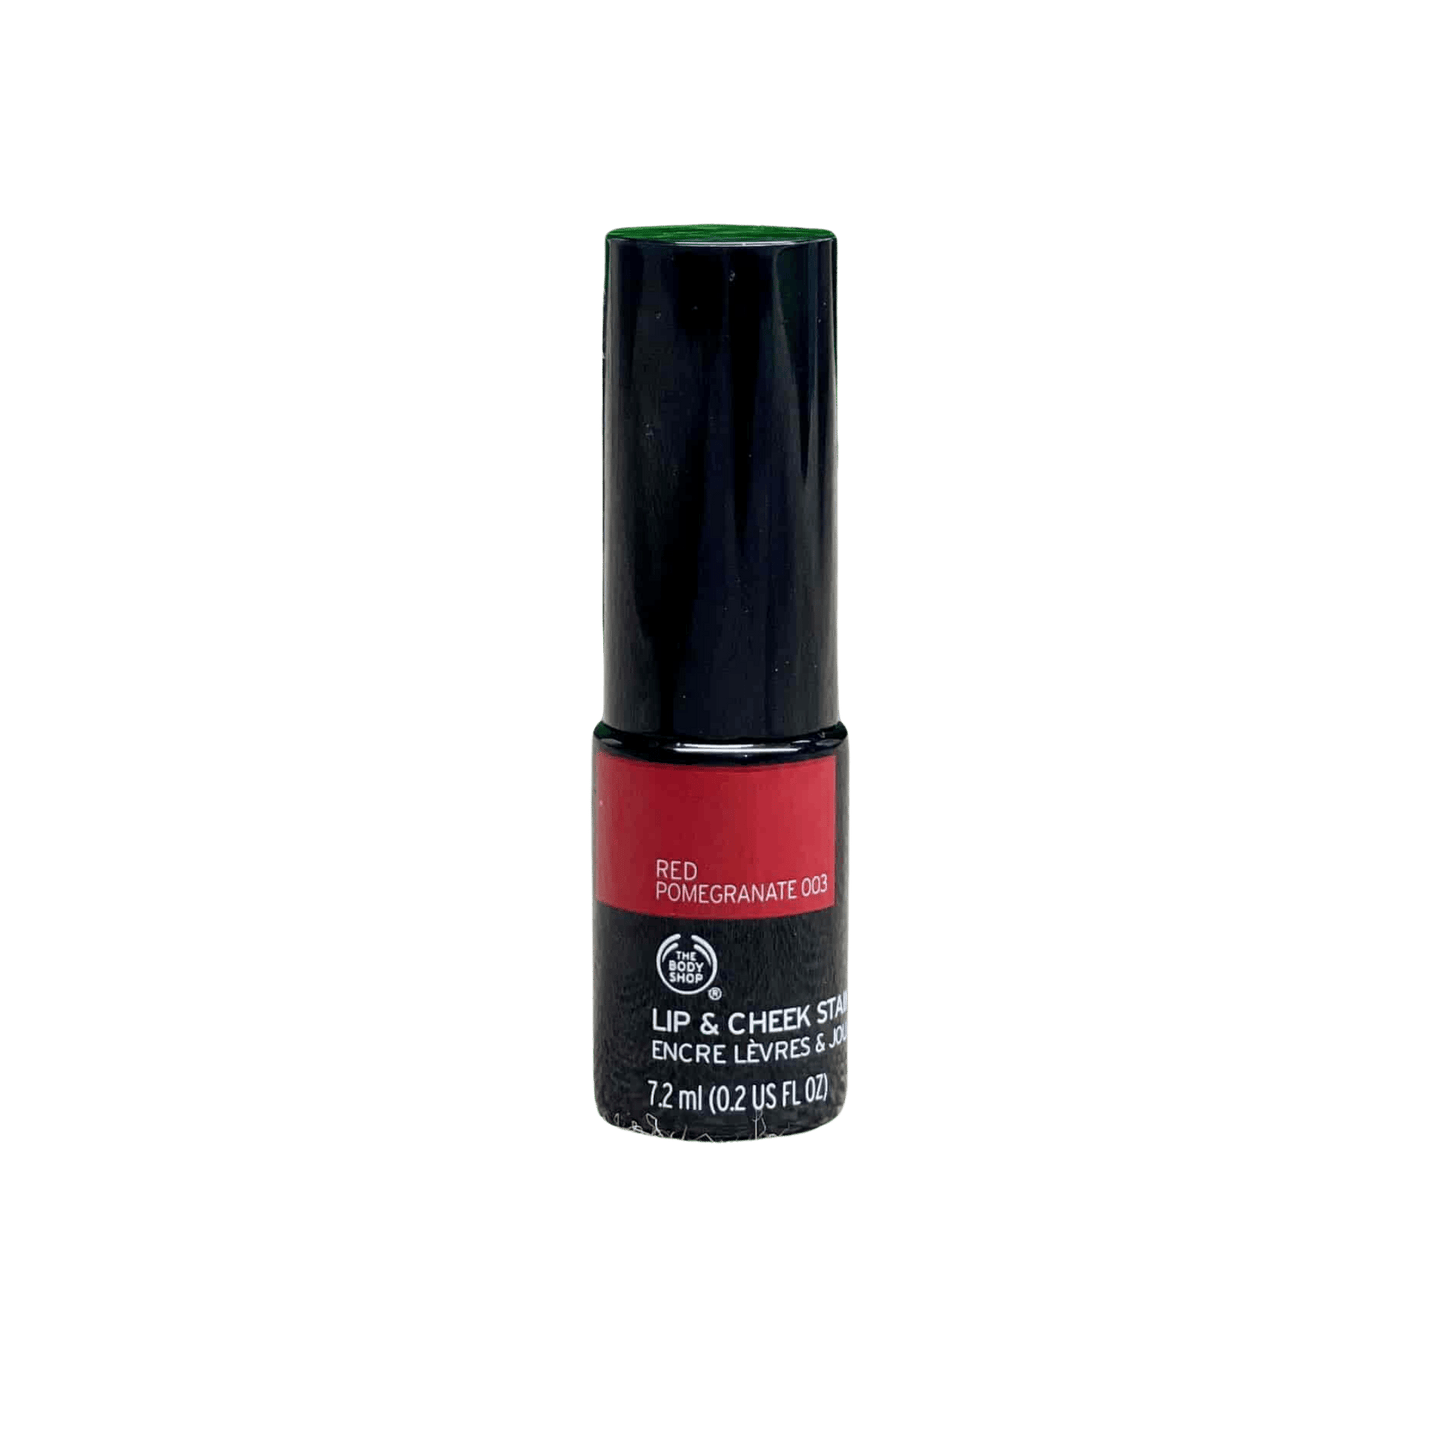 Buy The Body Shop - Lip and Cheek Stain - Red Pomegranate 7.2ml In Pakistan!